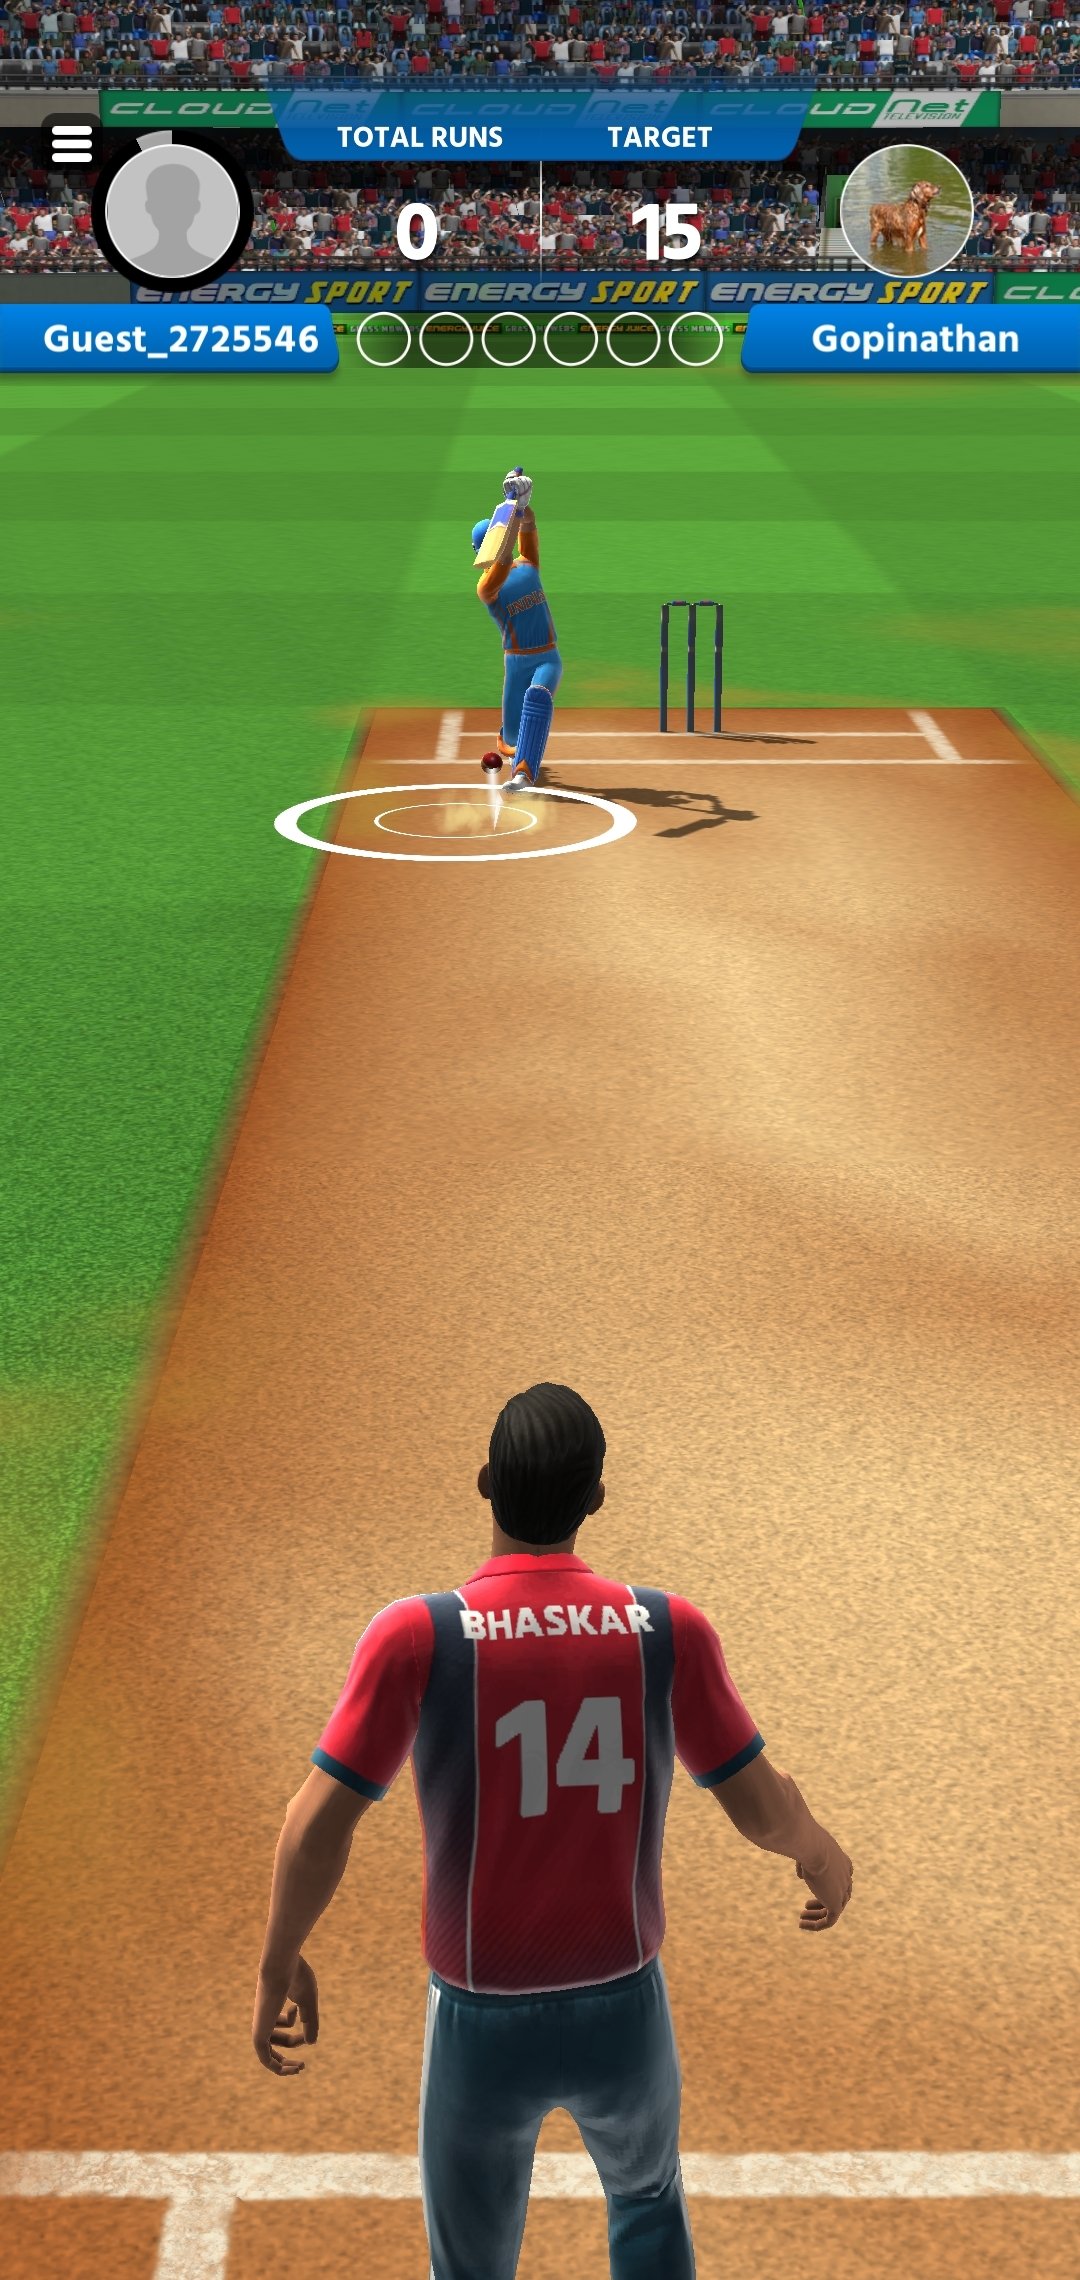 Cricket League APK Download for Android Free